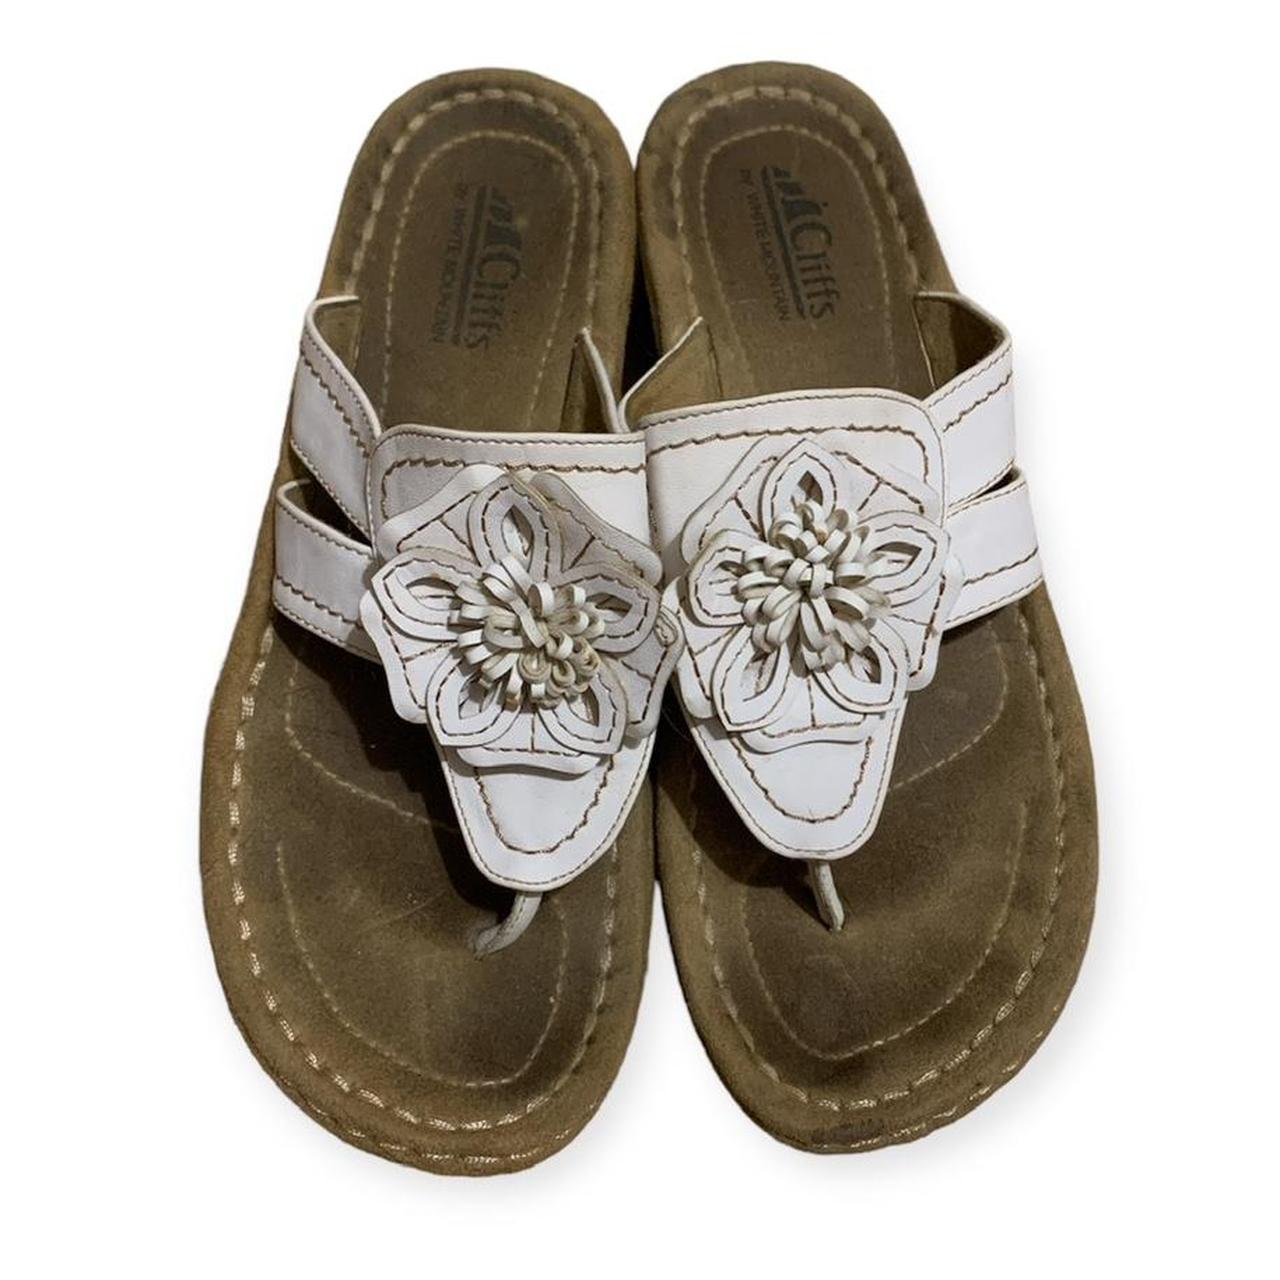 Cliffs by White Mountain Women's White and Tan Sandals